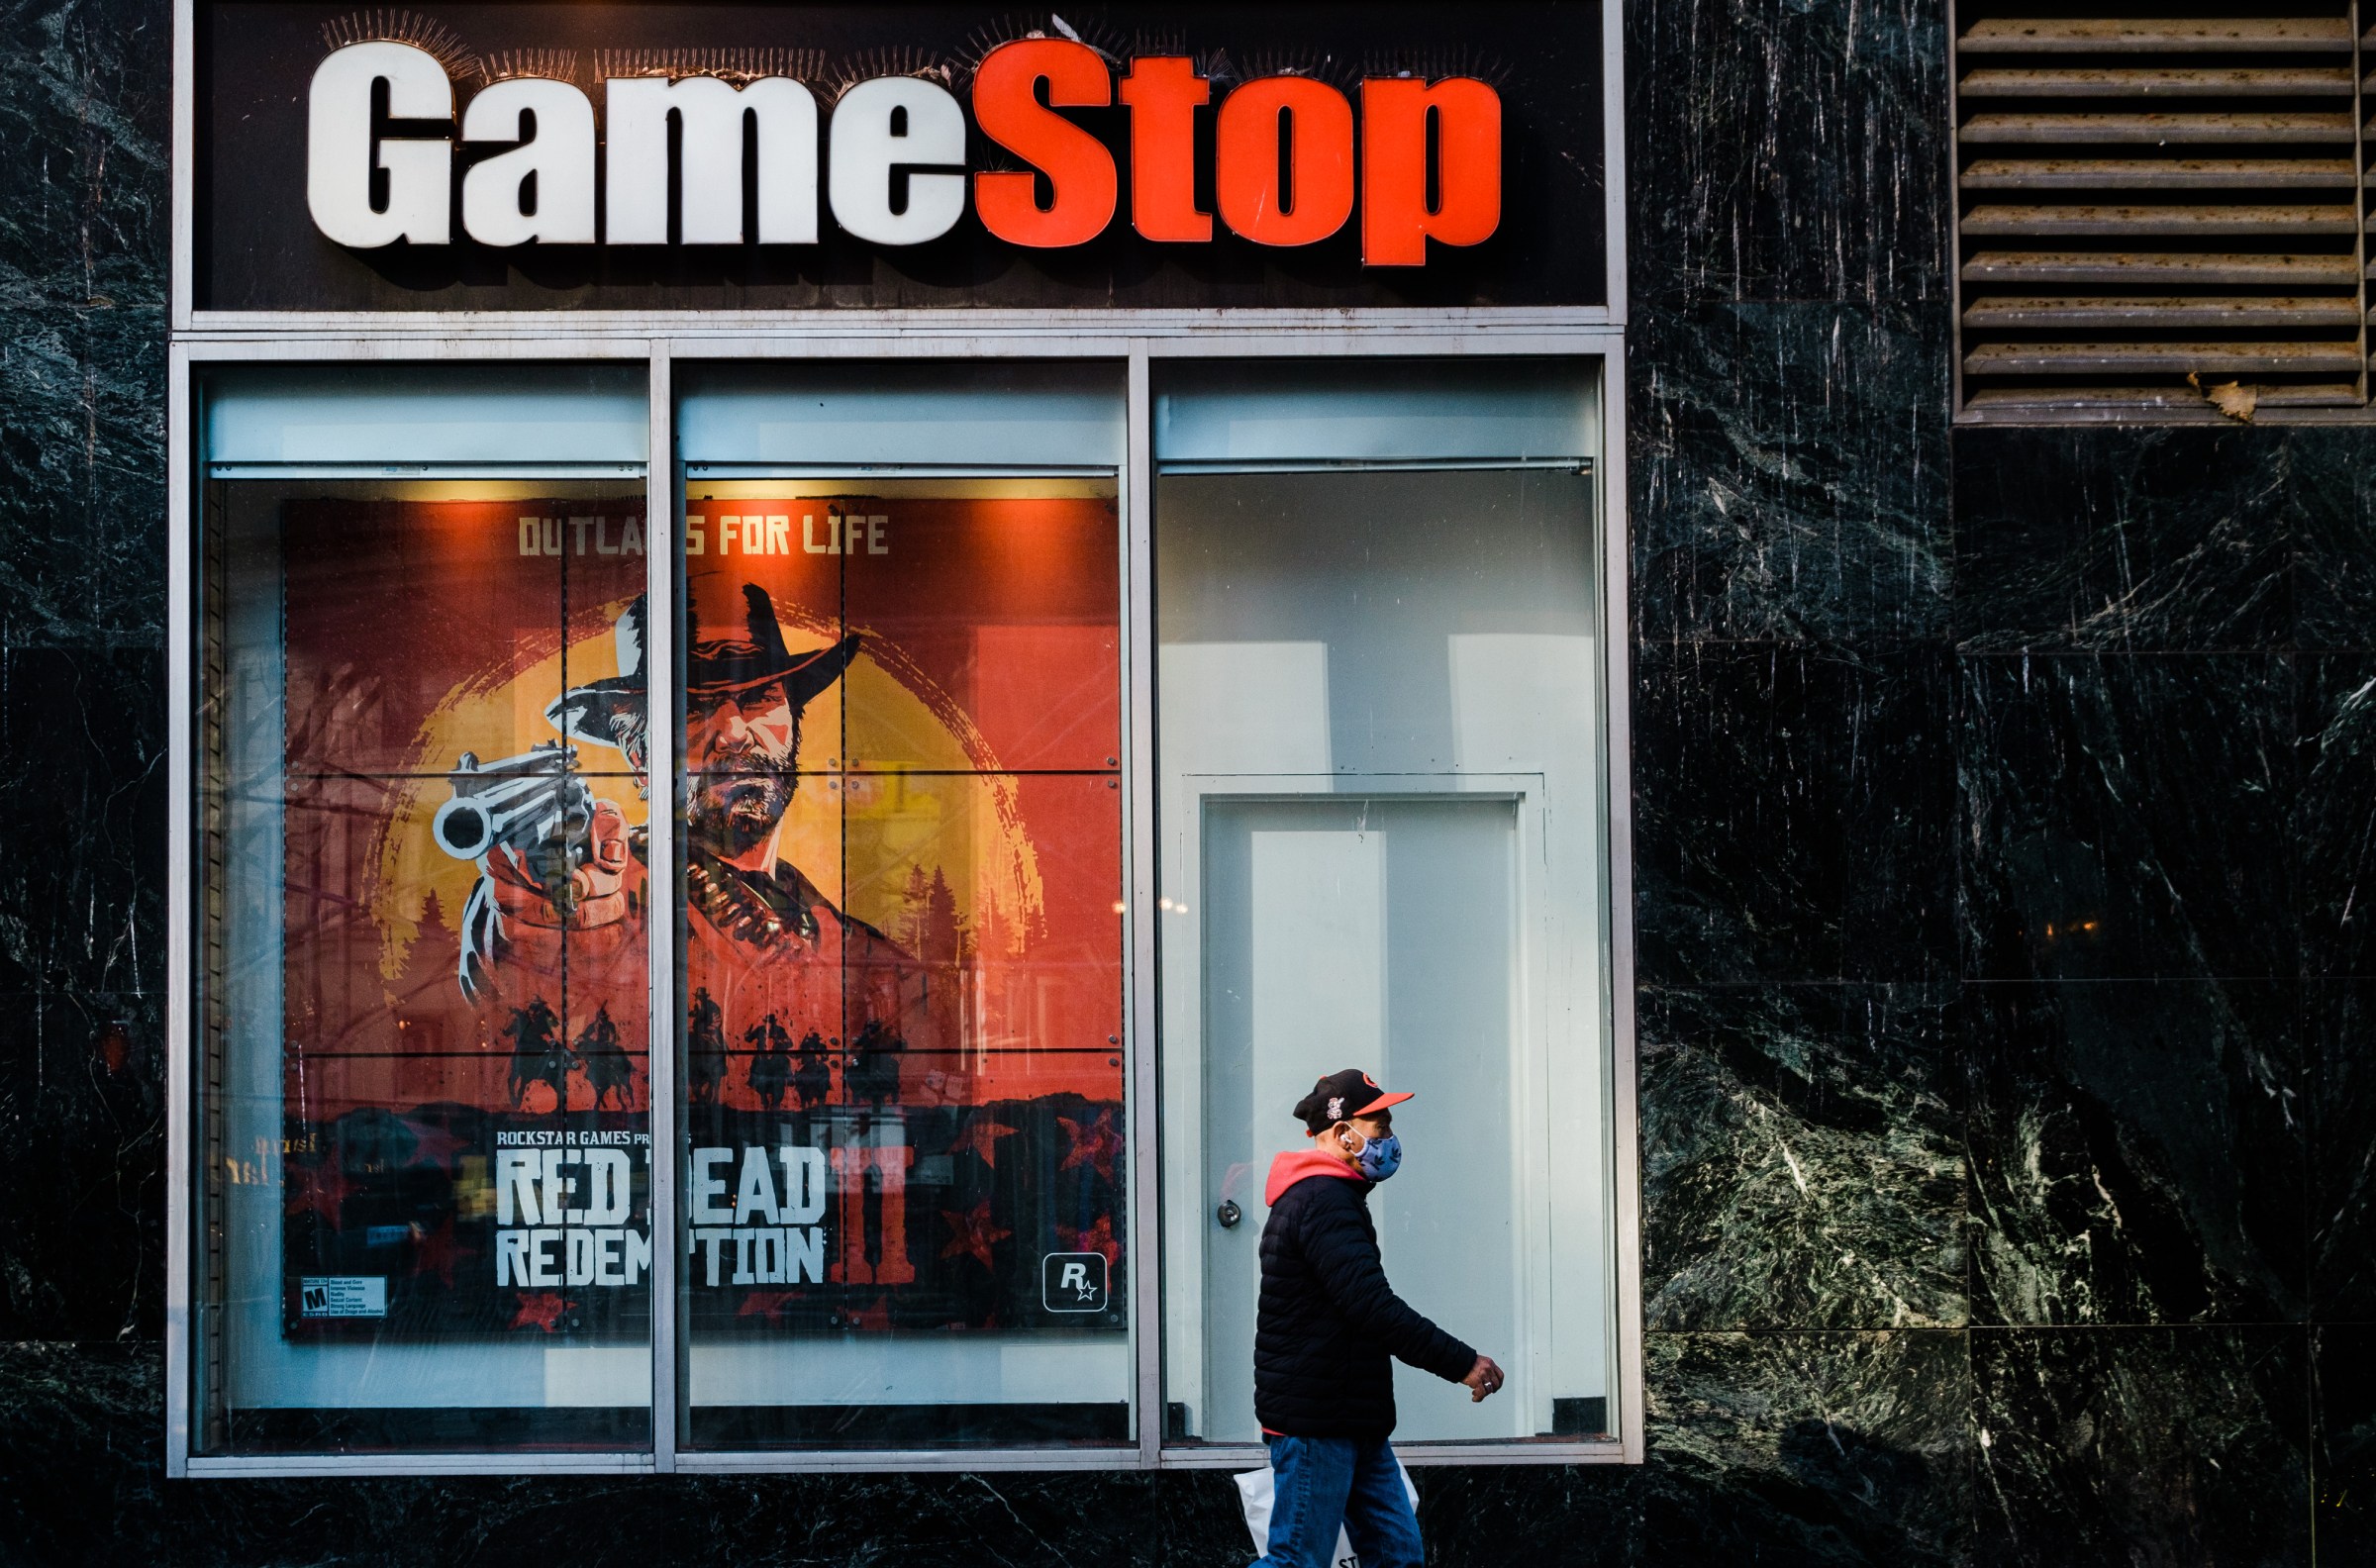 A pedestrian wearing a protective mask walks past a GameStop store in the Herald Square area of New York City on November 27, 2020.